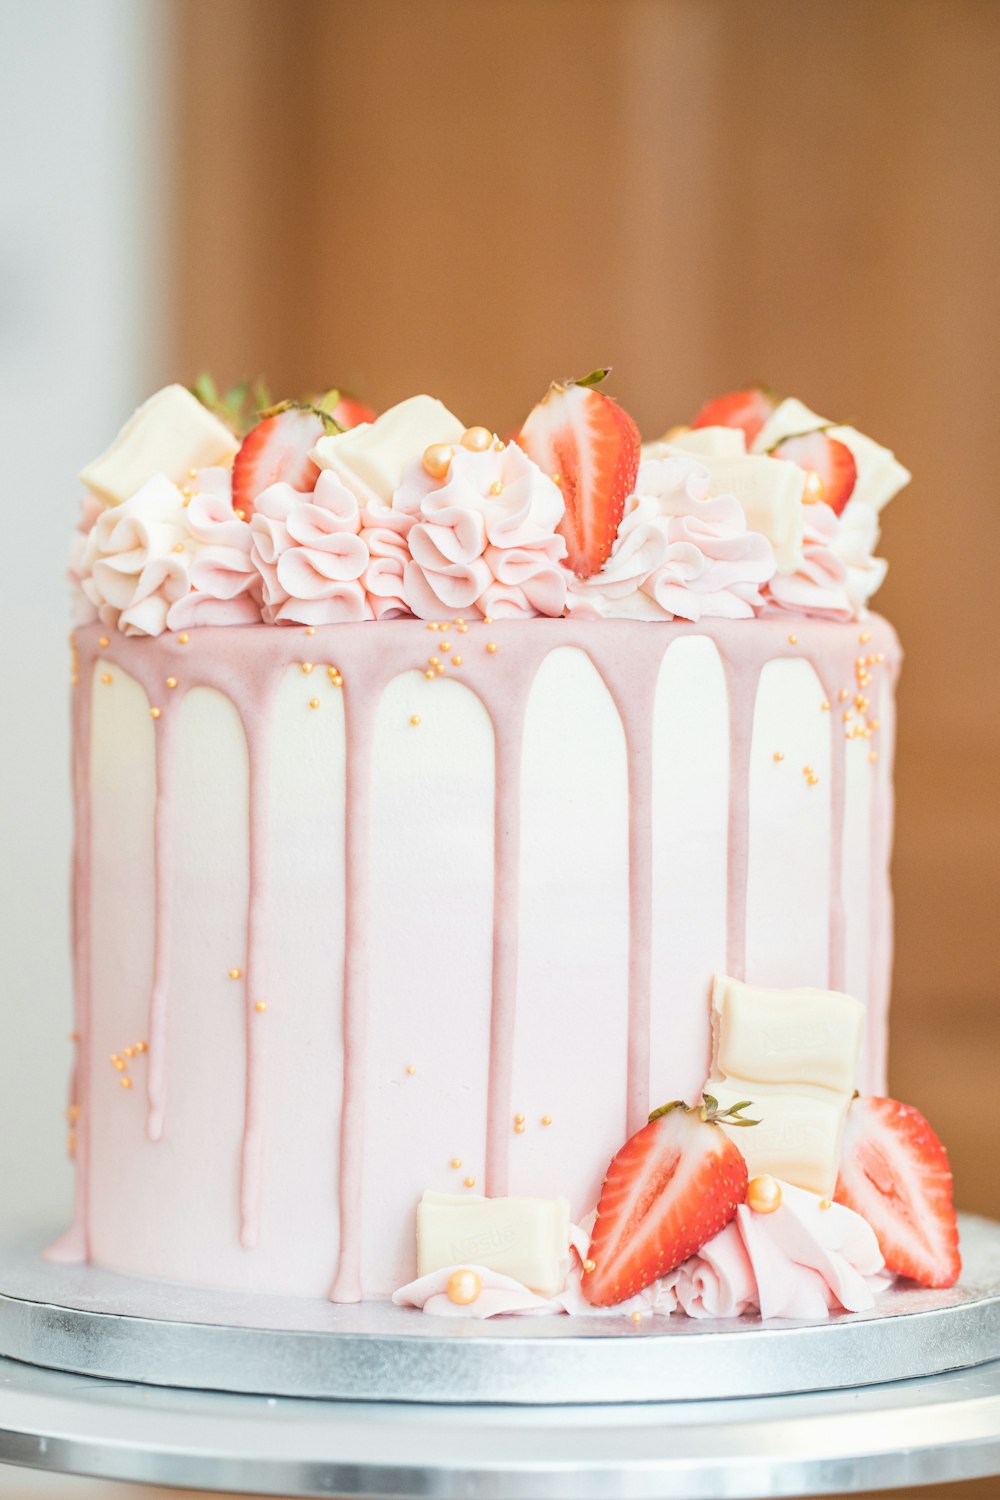 a pink cake with white frosting and strawberries on top